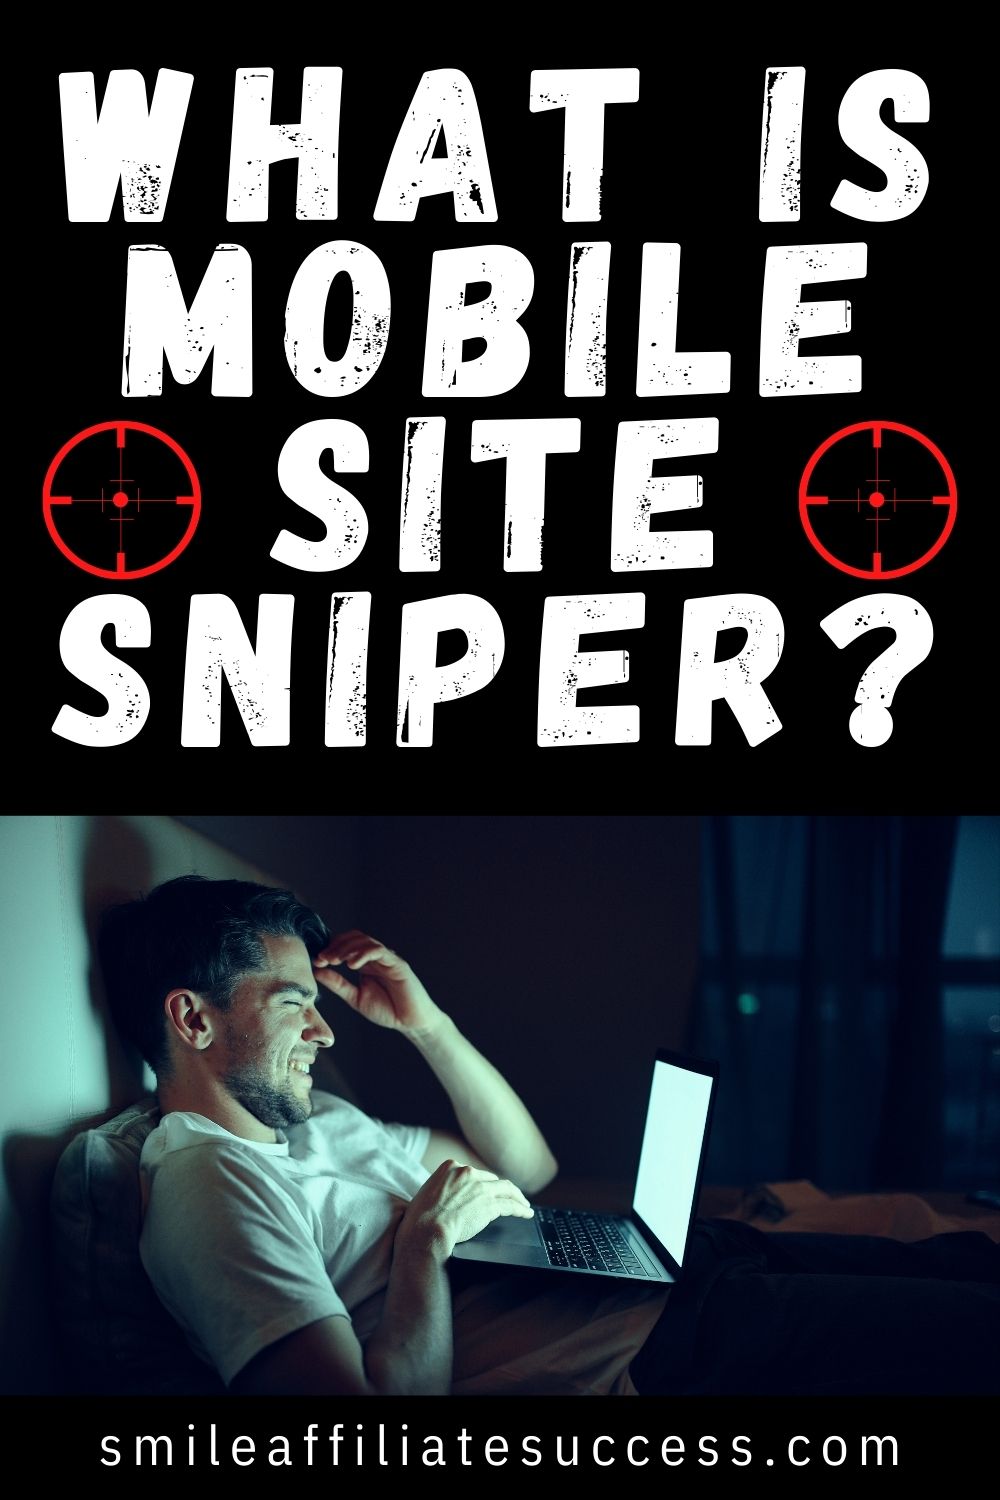 What Is Mobile Site Sniper?